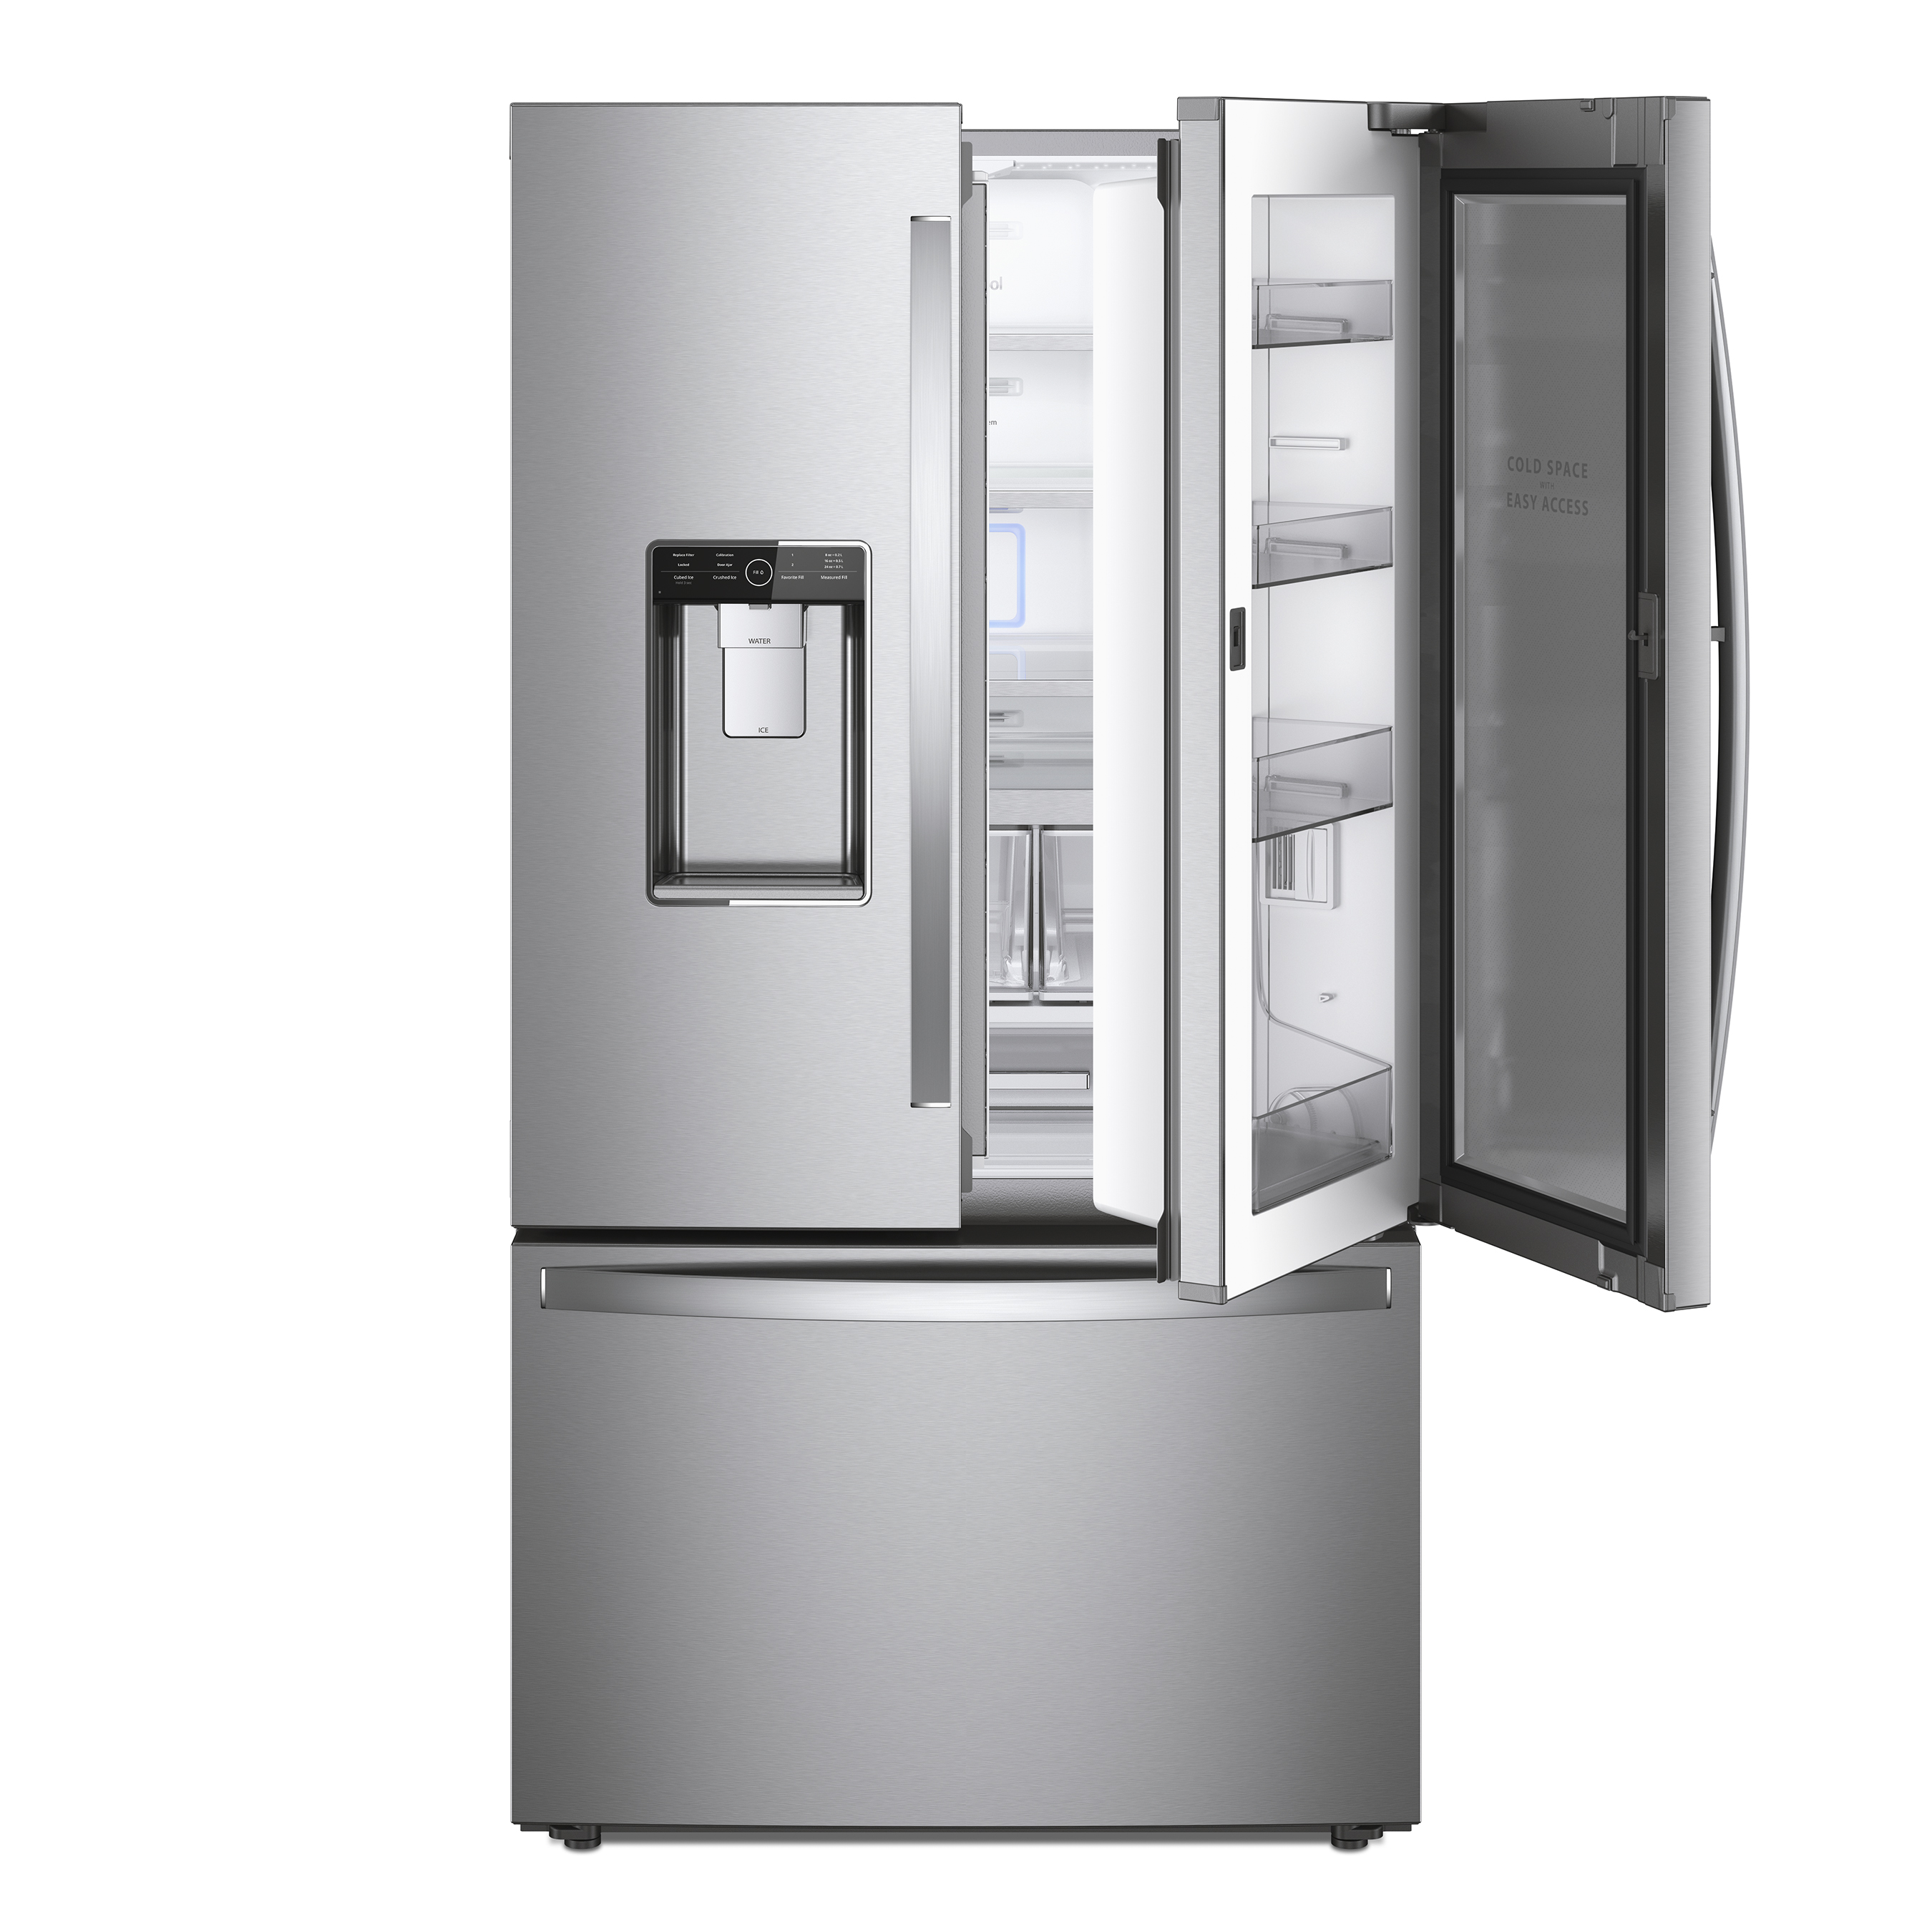 The Whirlpool® French Door-within-Door Refrigerator, an Innovation Award Honoree (Home Appliance Category), keeps milk & other drinks extra cold with a door-within-door cooling system.